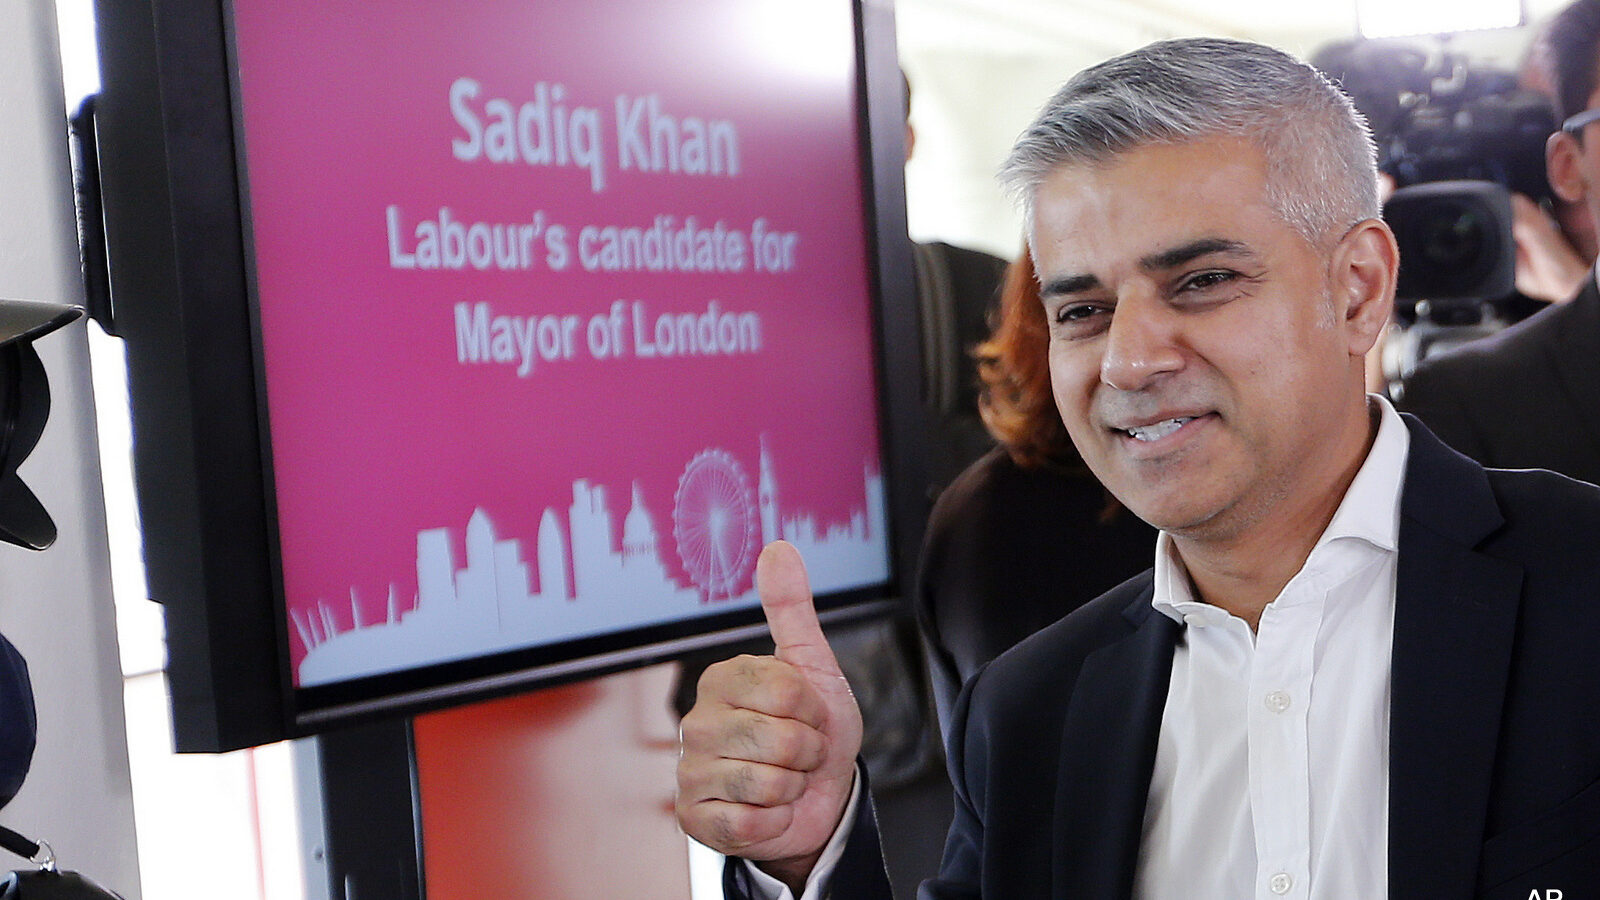 Sadiq Khan gives a thumbs up after he was announced the winner of the election for the Labour party's candidate for the Mayor of London, at the Royal Festival Hall in London, Friday, Sept. 11, 2015